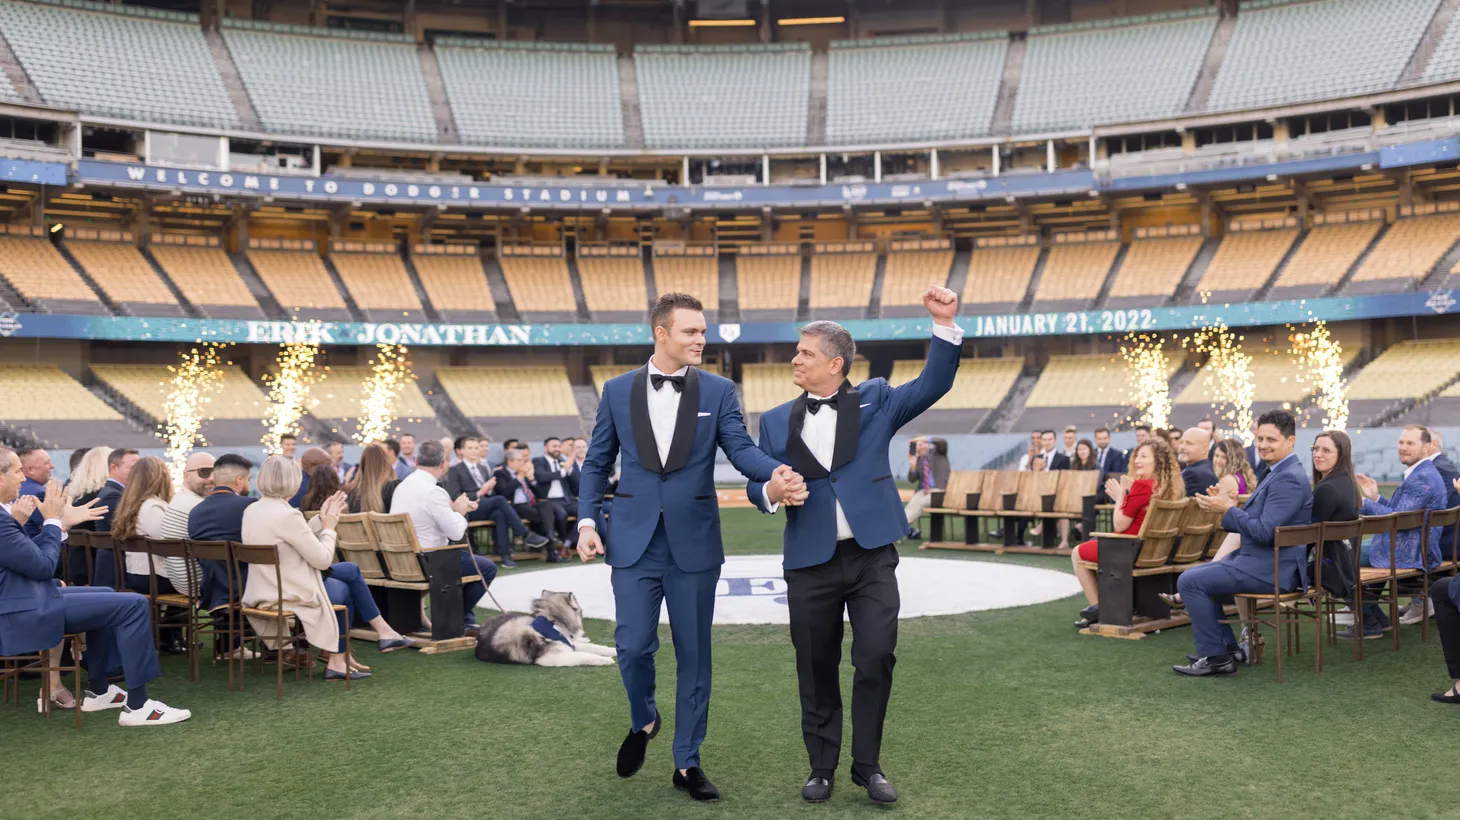 More than 70 people watched Erik Braverman (right) and Jonathan Cottrell (left) become husband and husband on January 21, 2022.